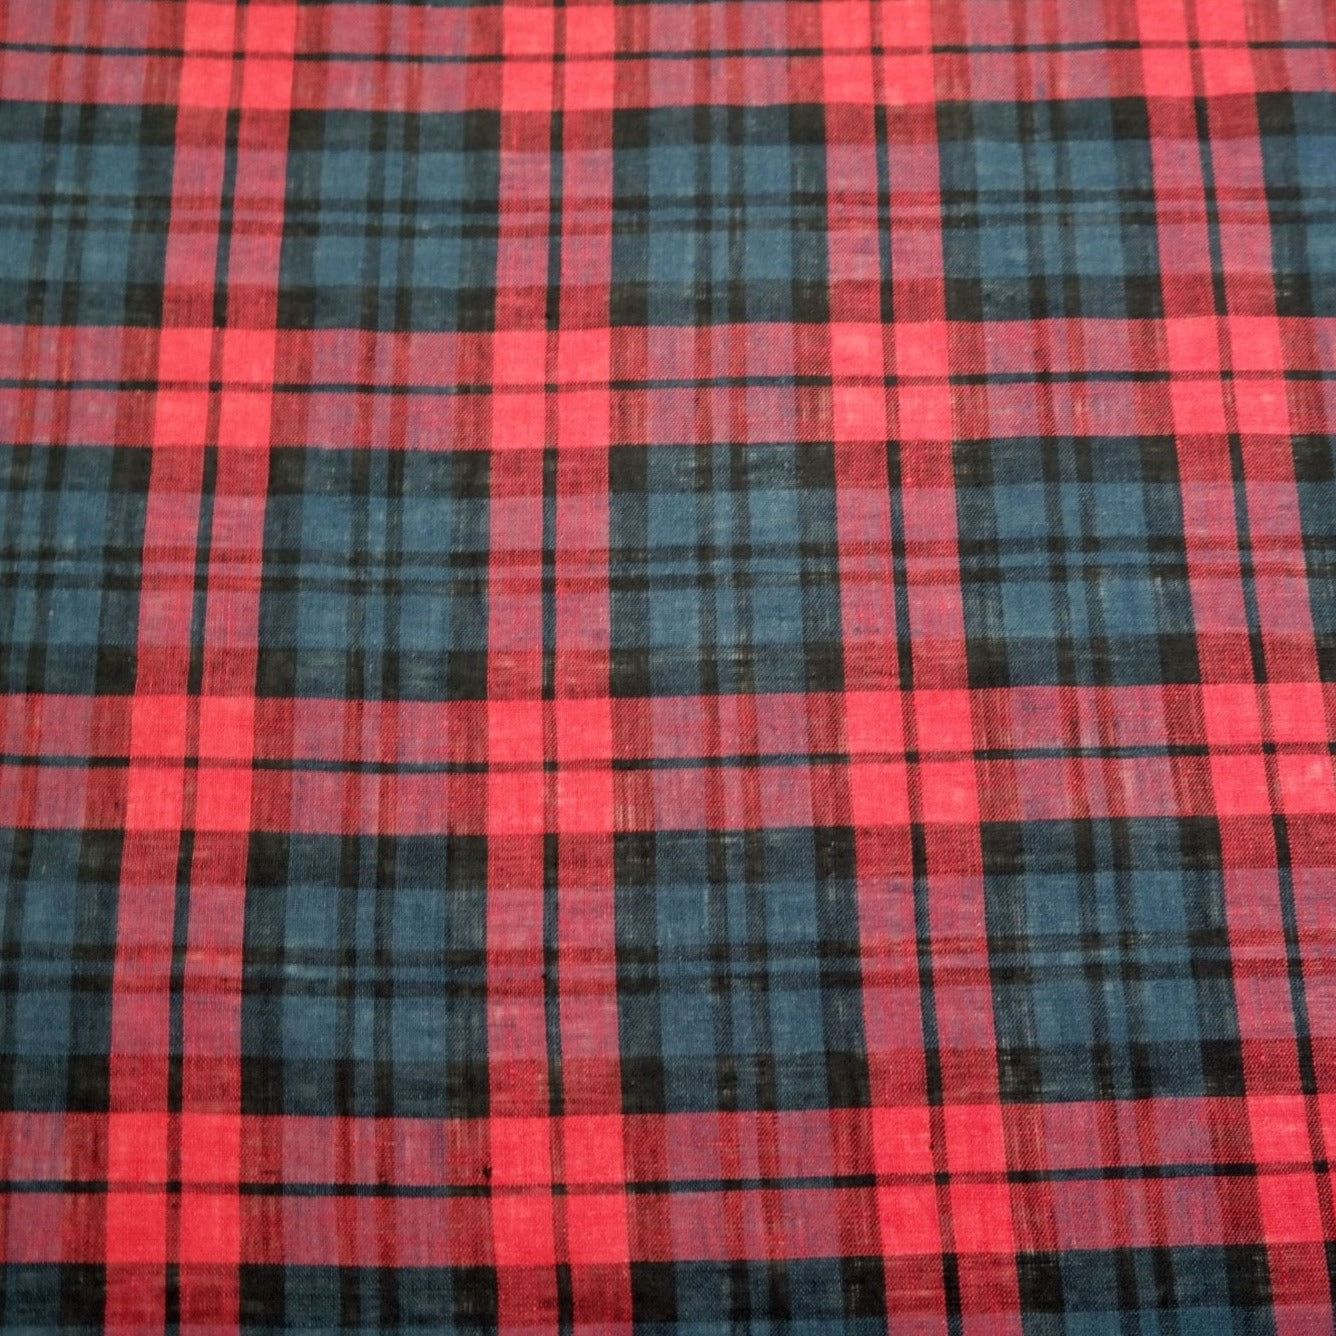 100% Linen Fabric Red Madras Plaid Check Light Weight 7289 - The Linen Lab - Red check 7289